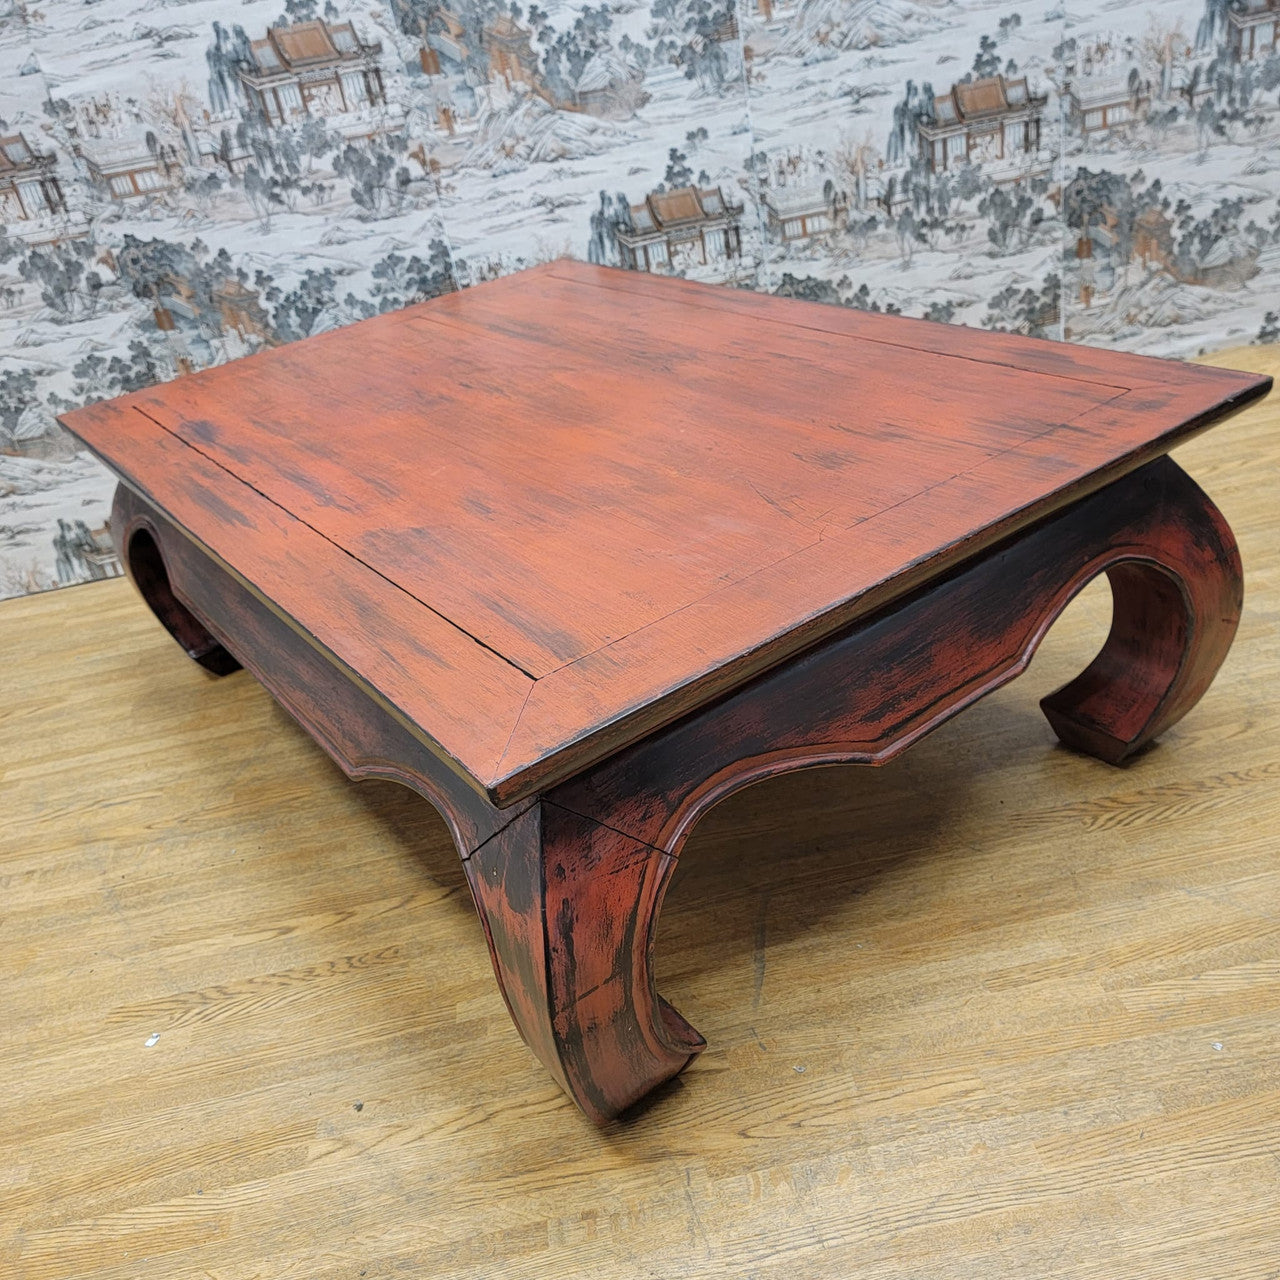 Vintage Kang Style Chinese Teakwood Red Lacquer Coffee Table